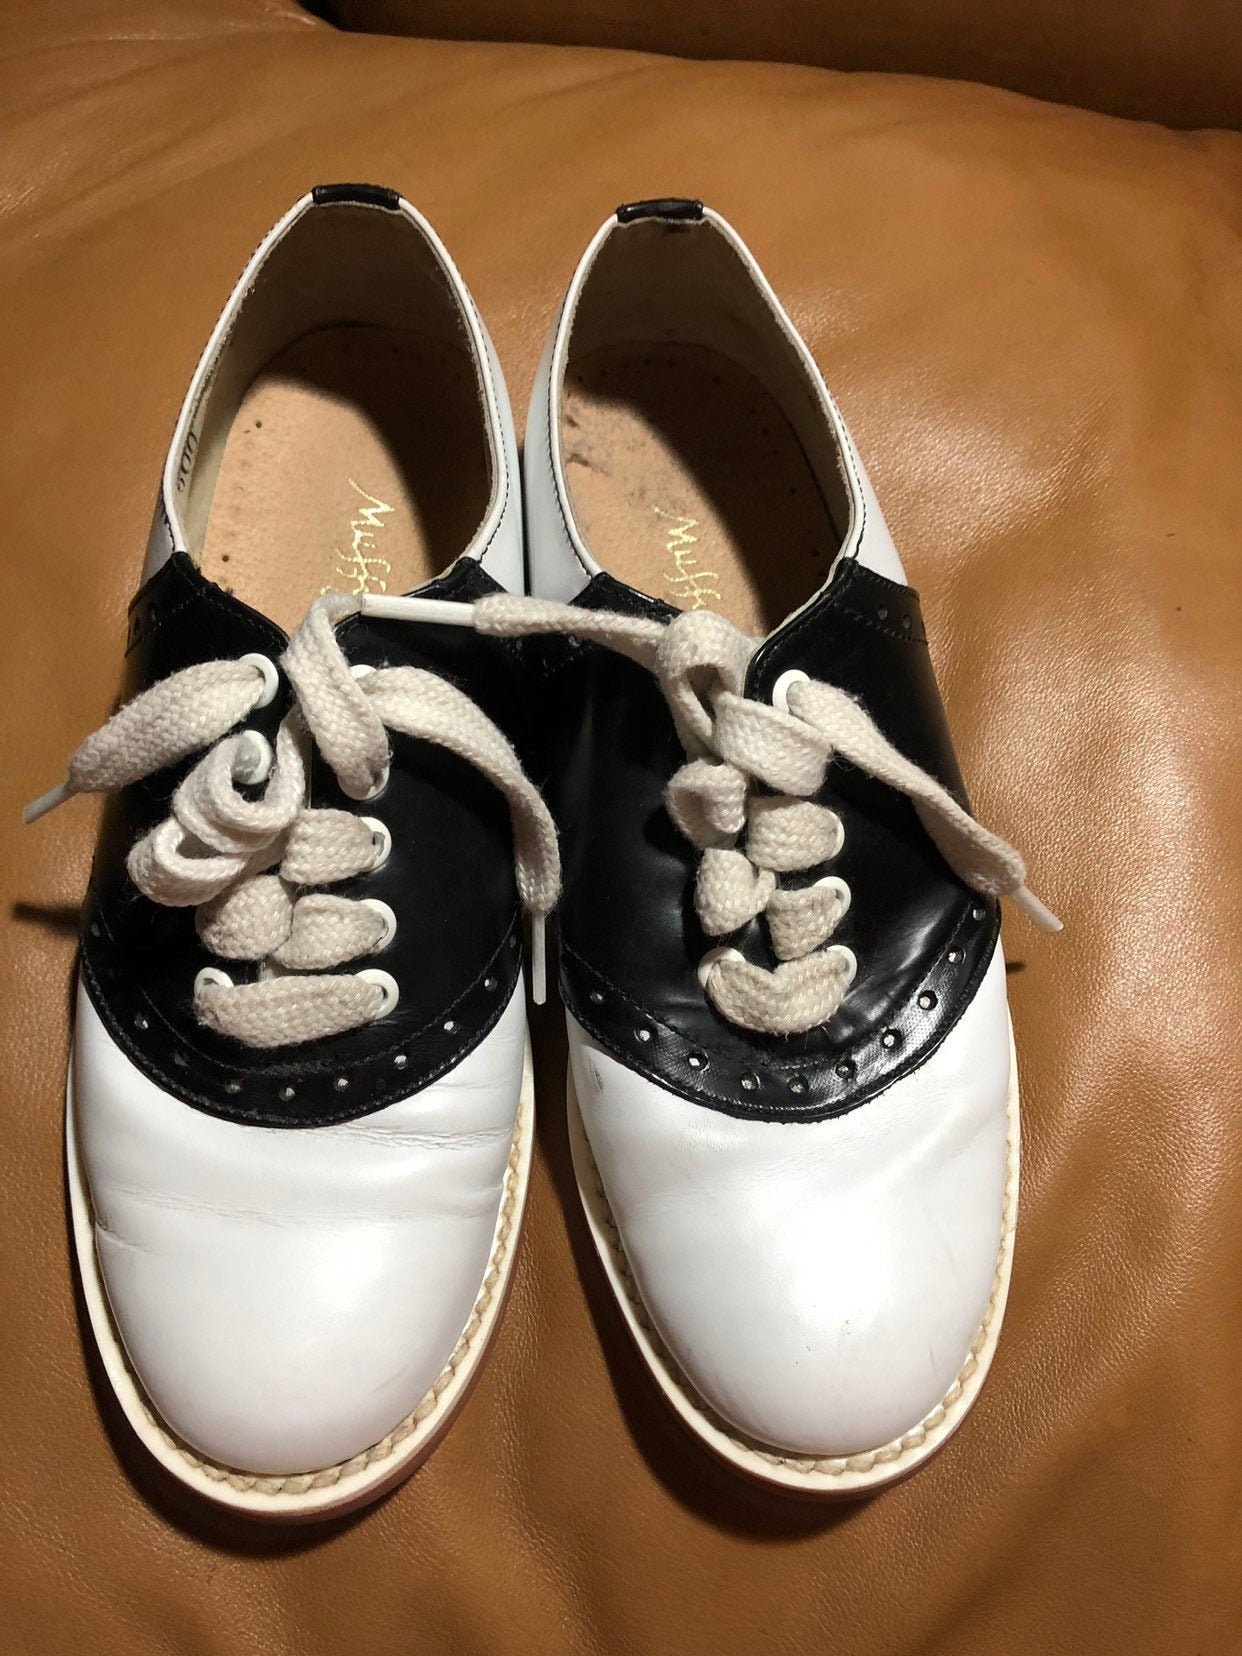 vintage swing shoes